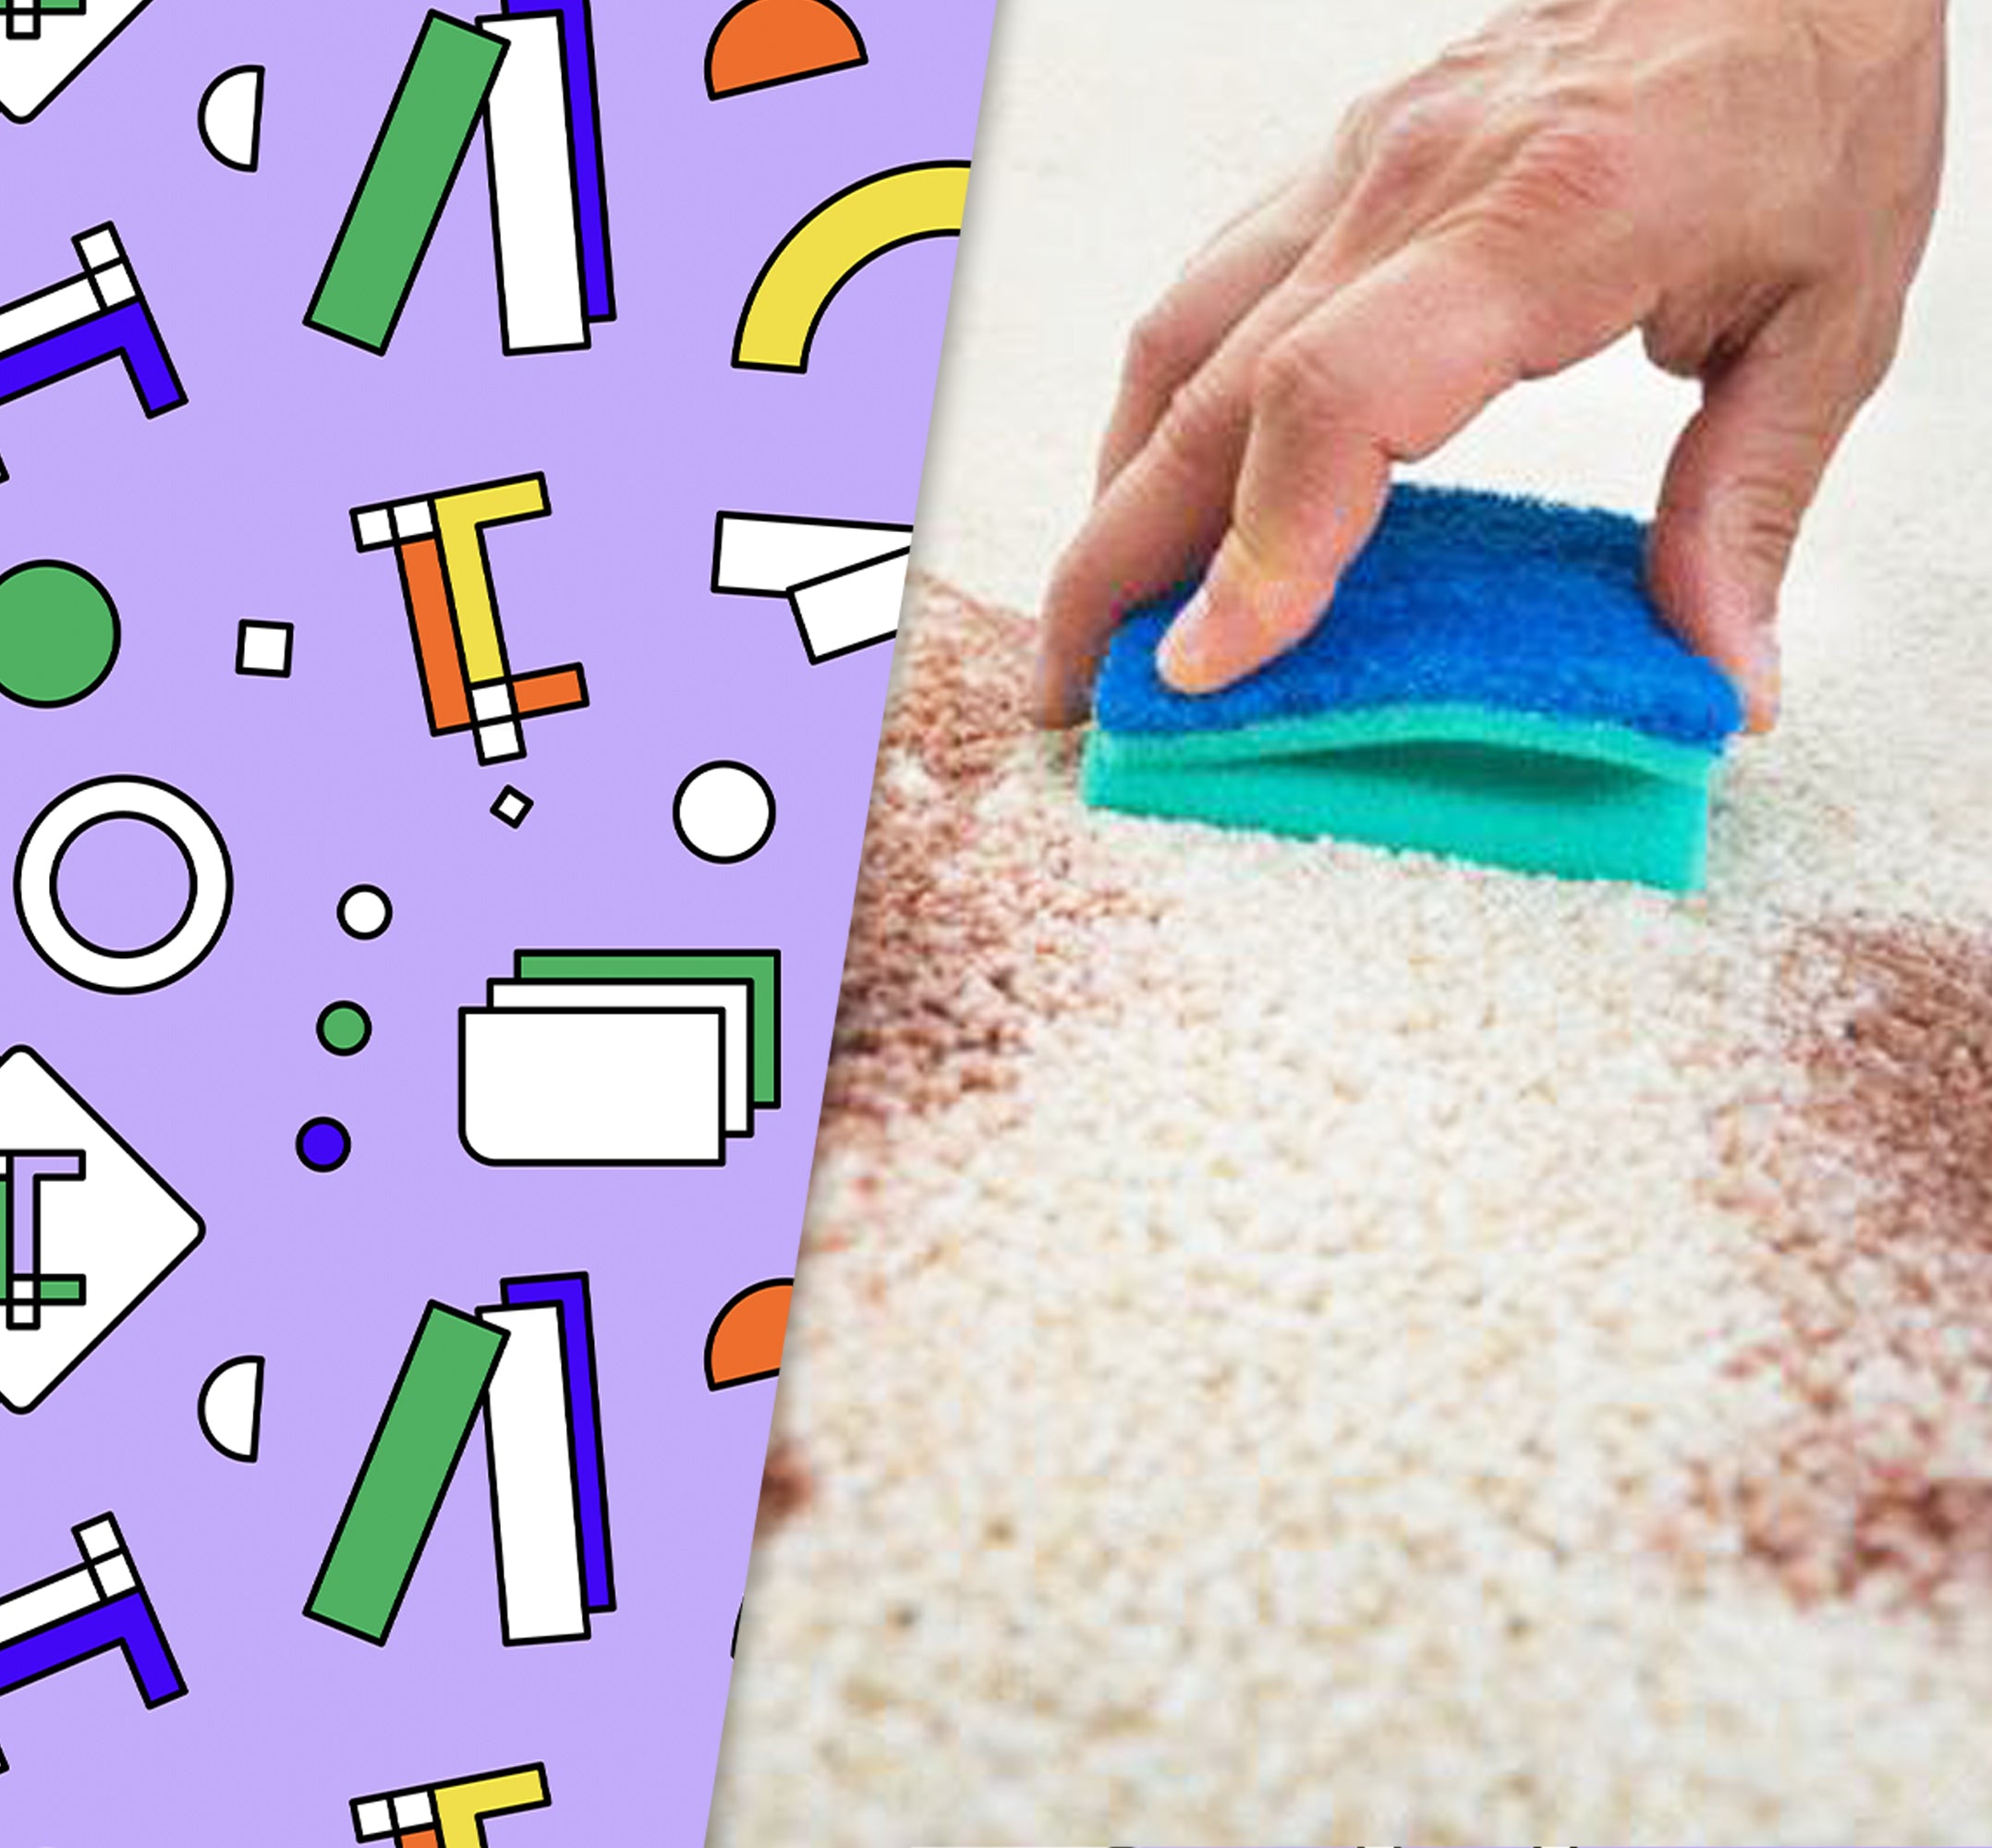 TUFTING 101 - YOUR GUIDE TO TUFTING – Aus Tufting Supplies